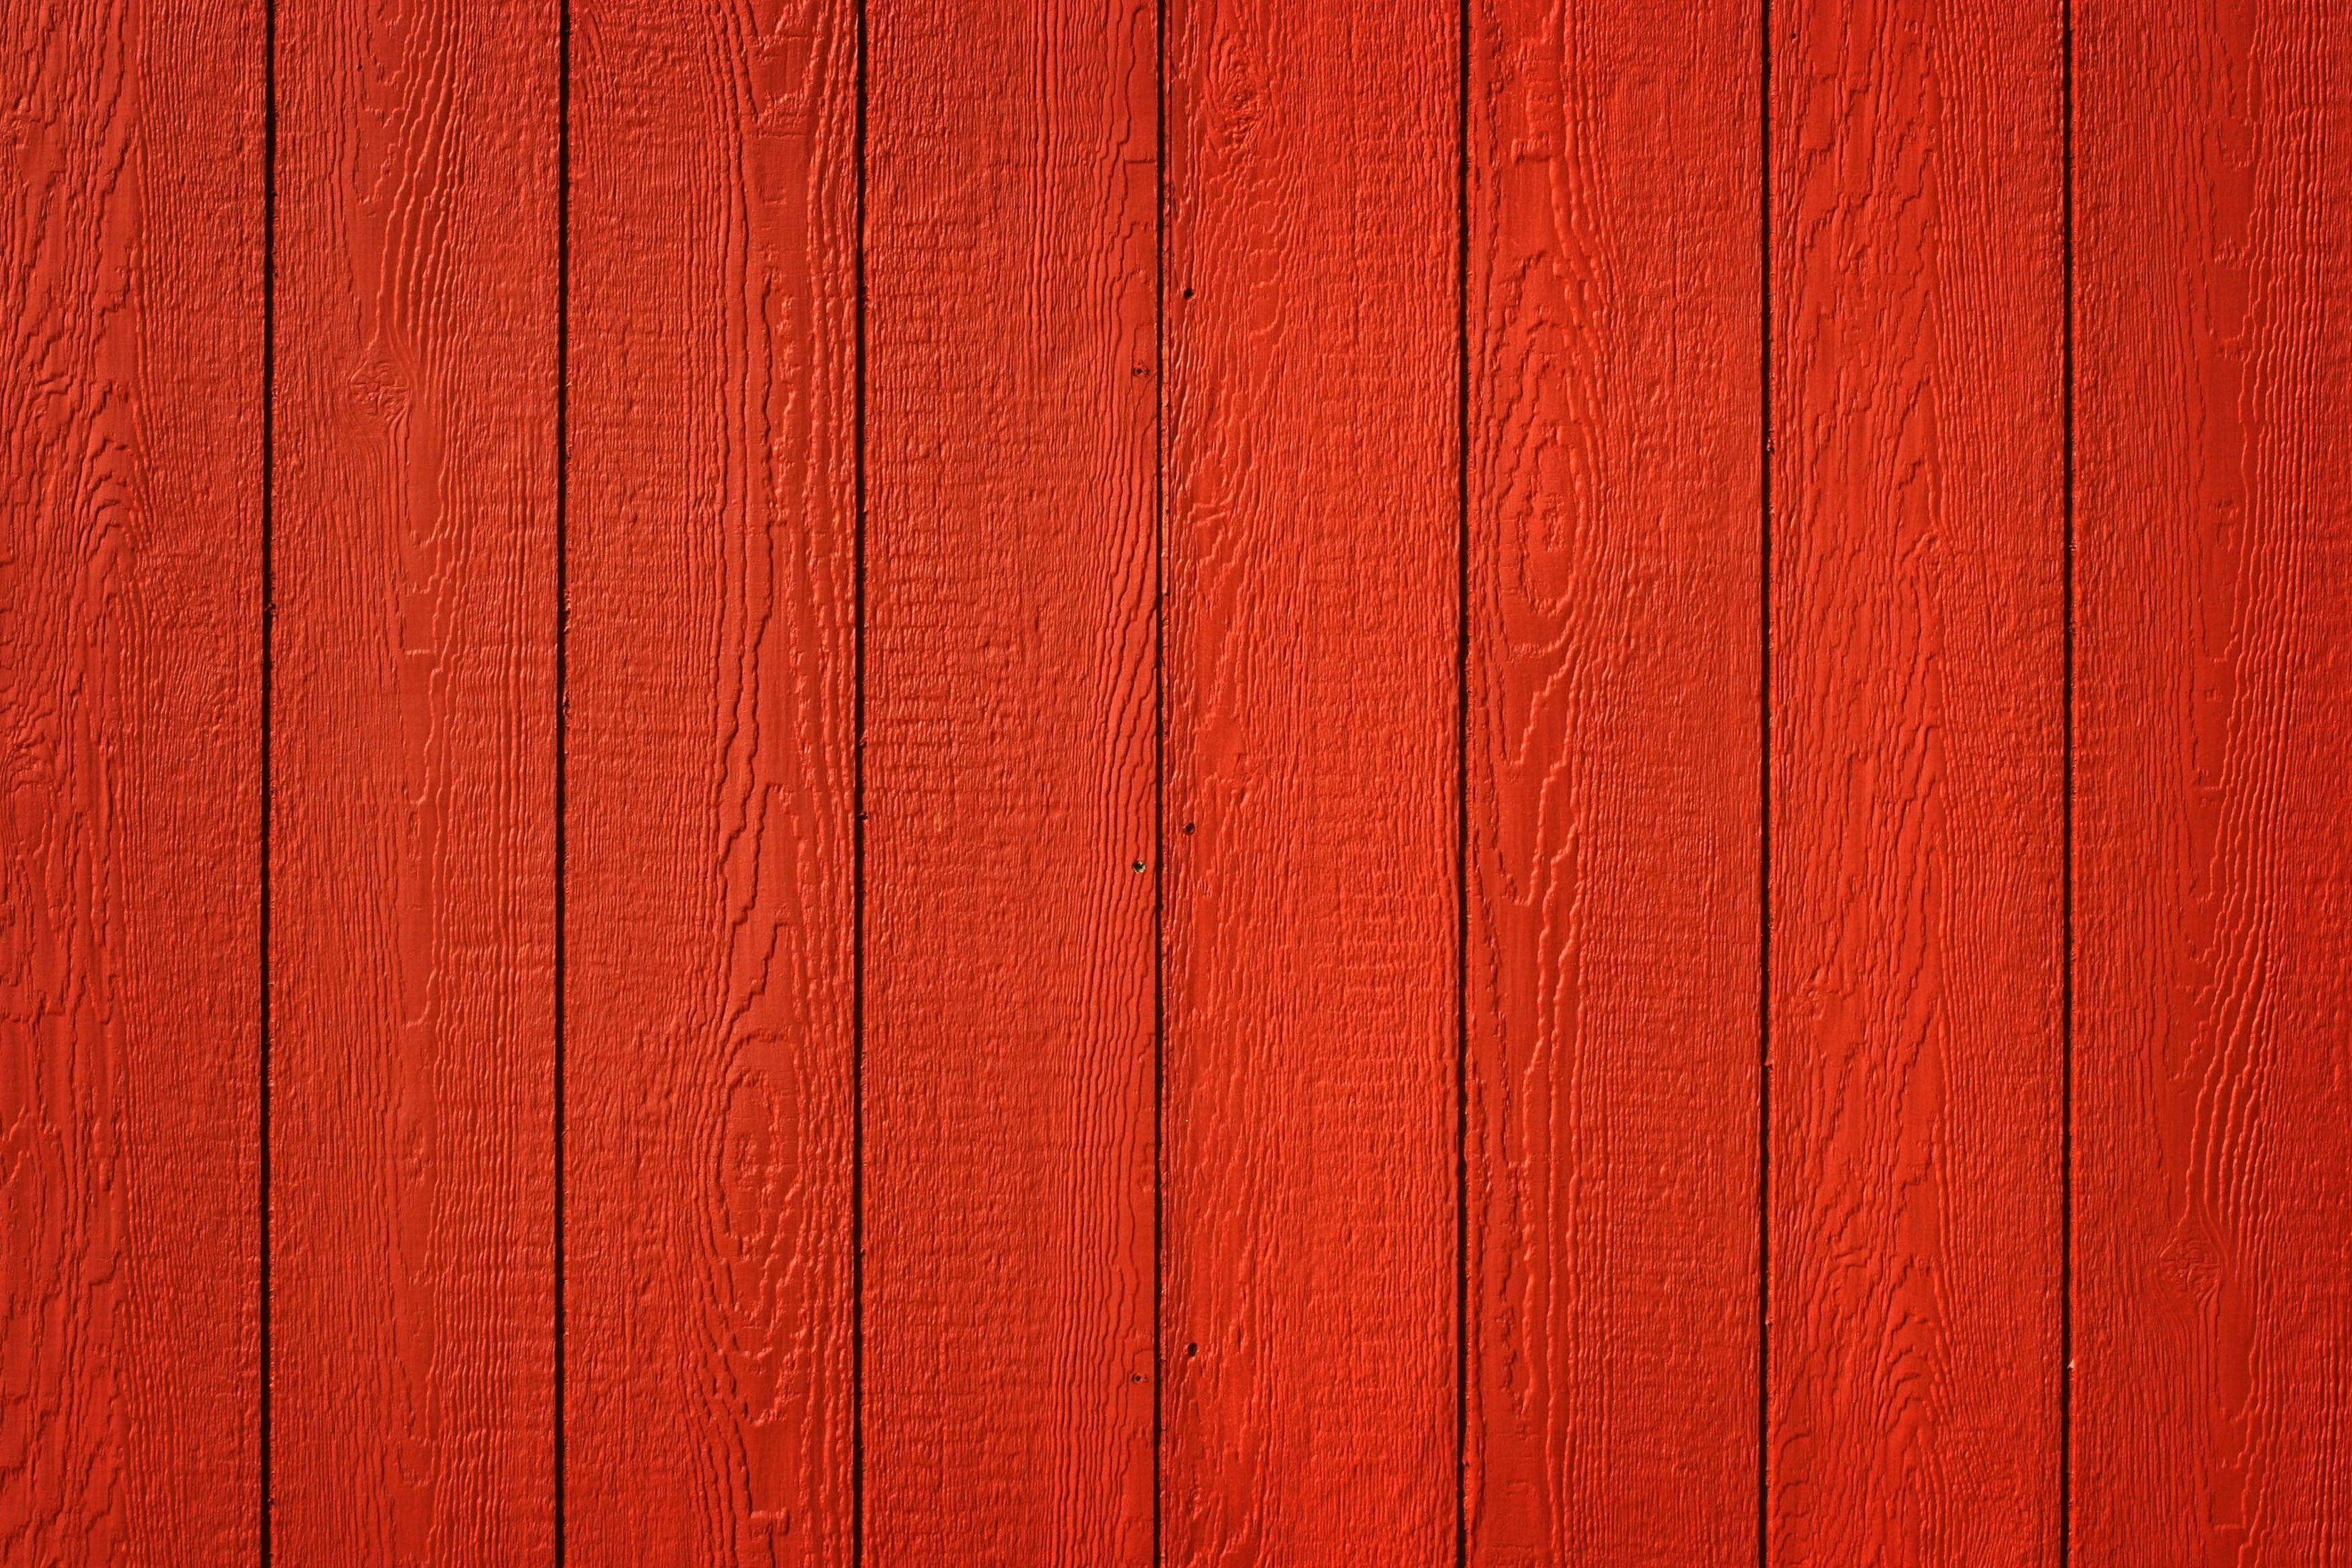 red barn wood background